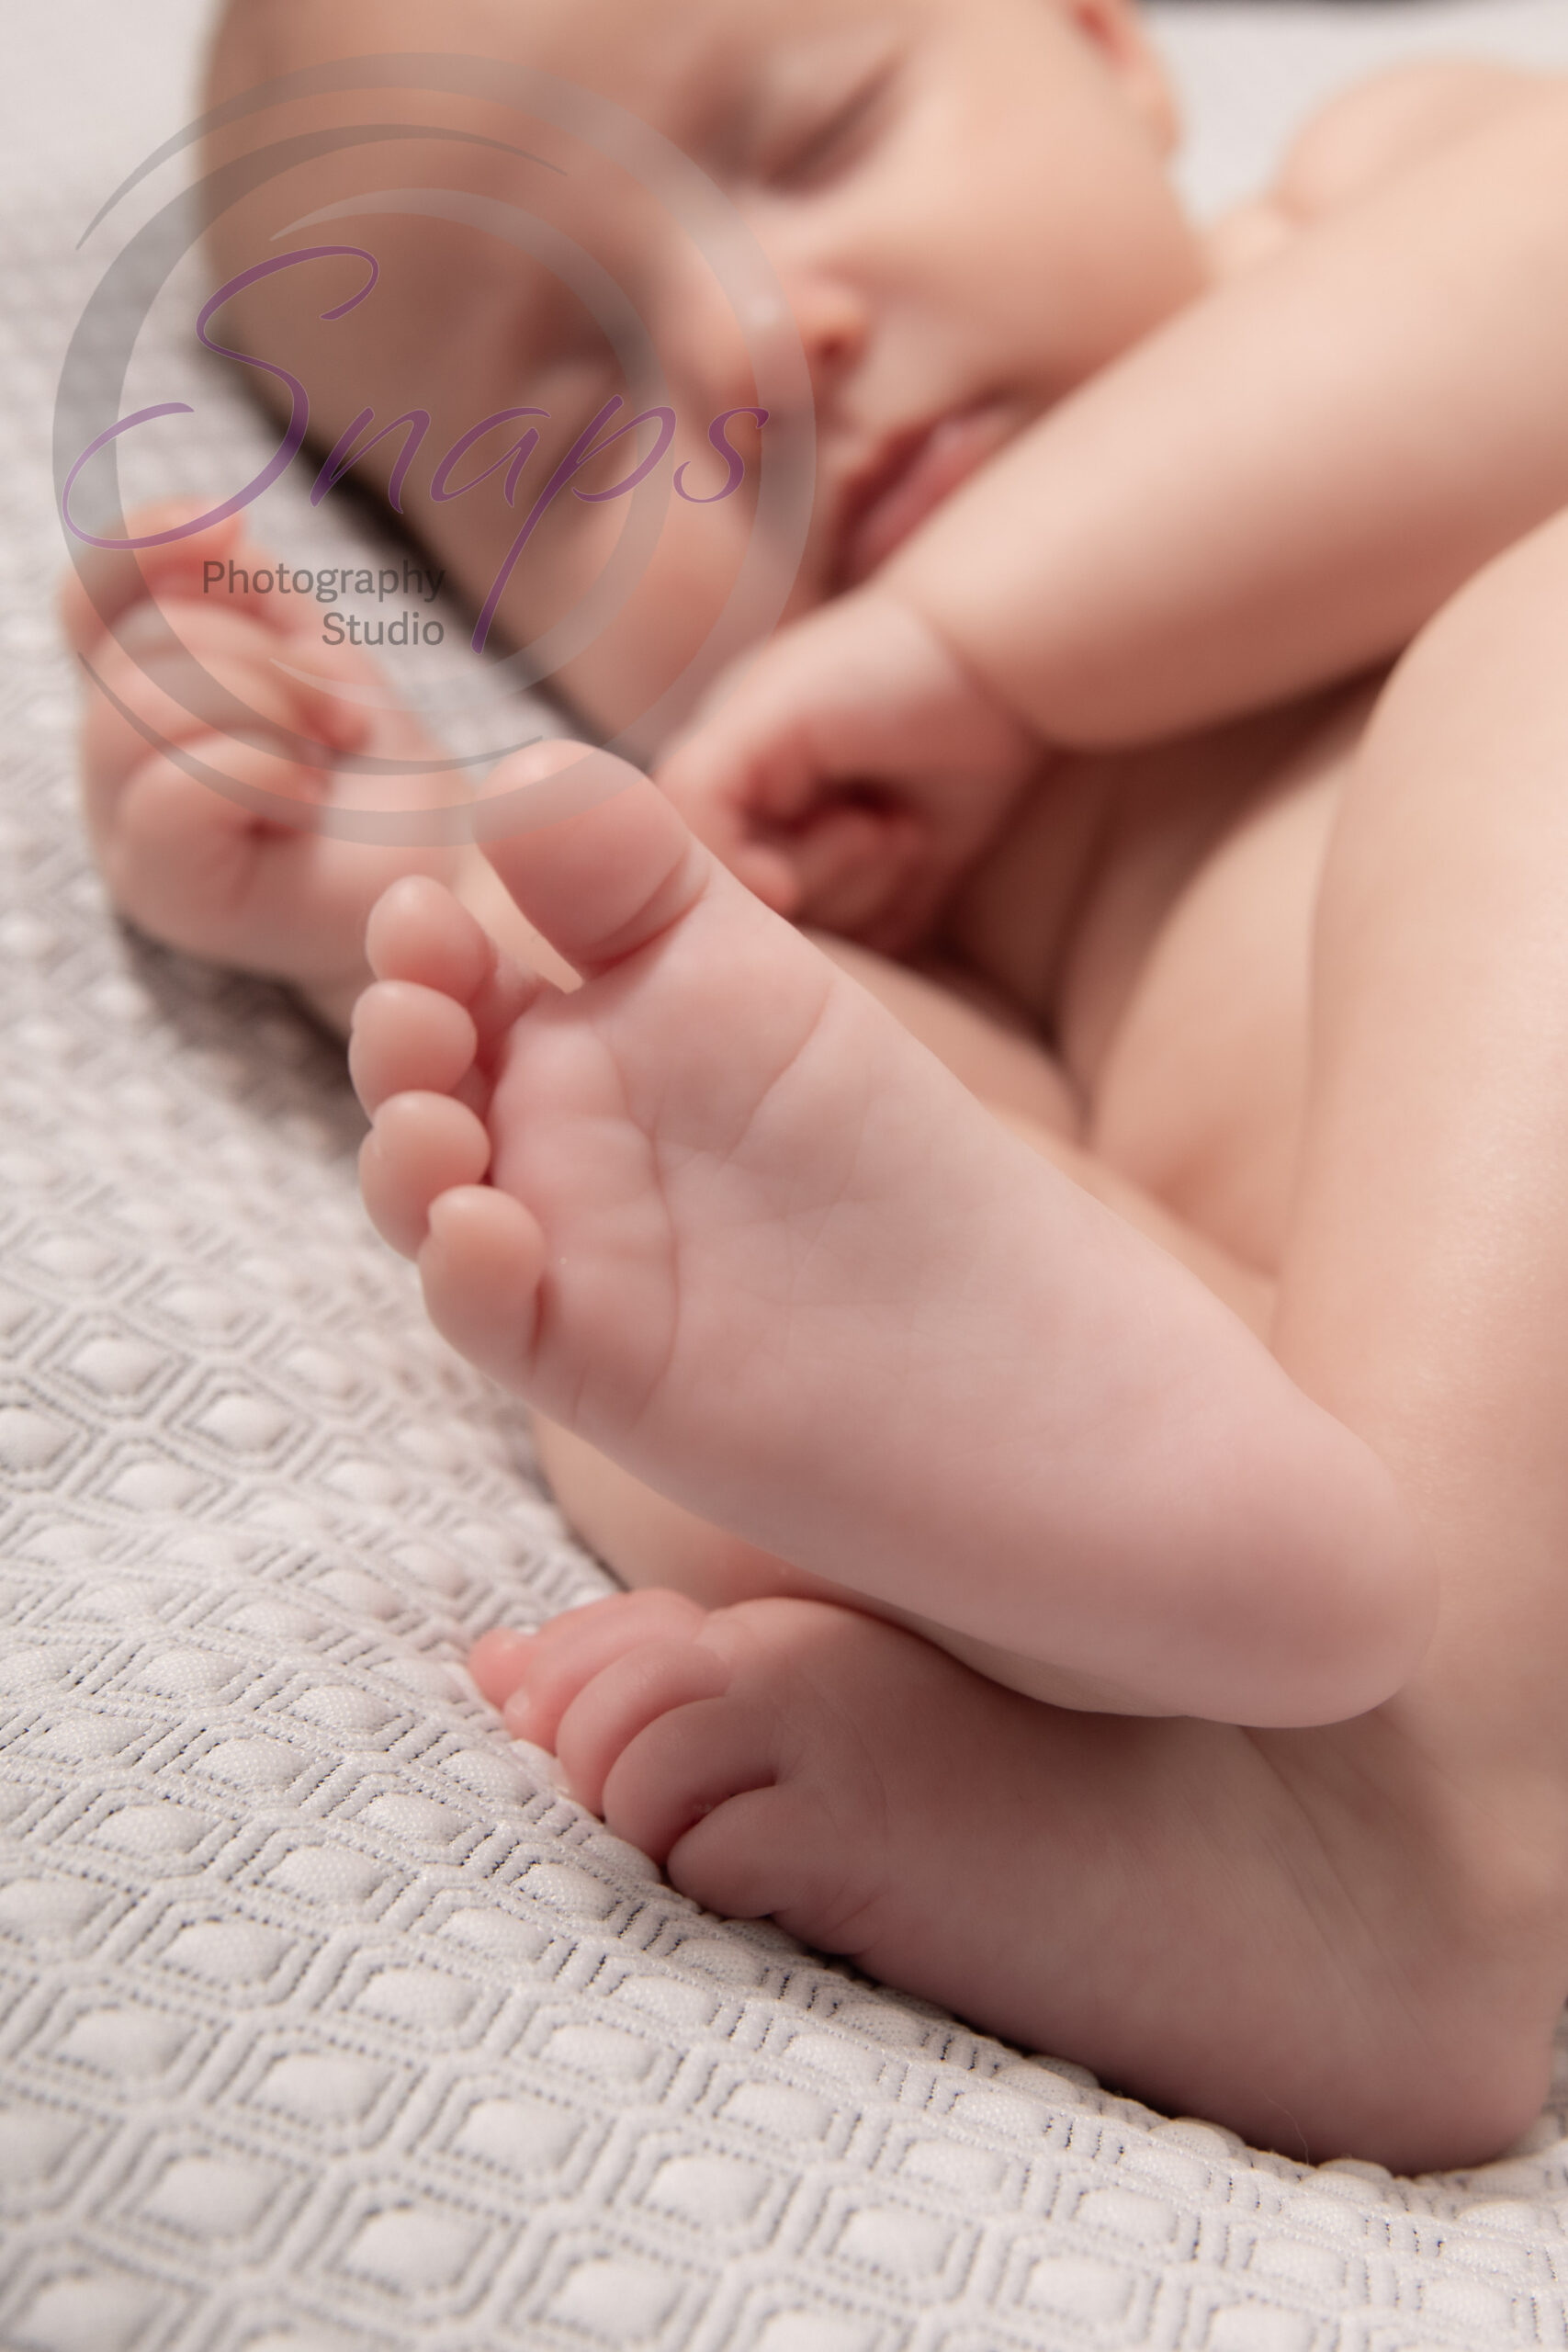 a newborns foot while the baby is sleeping on a grew bed